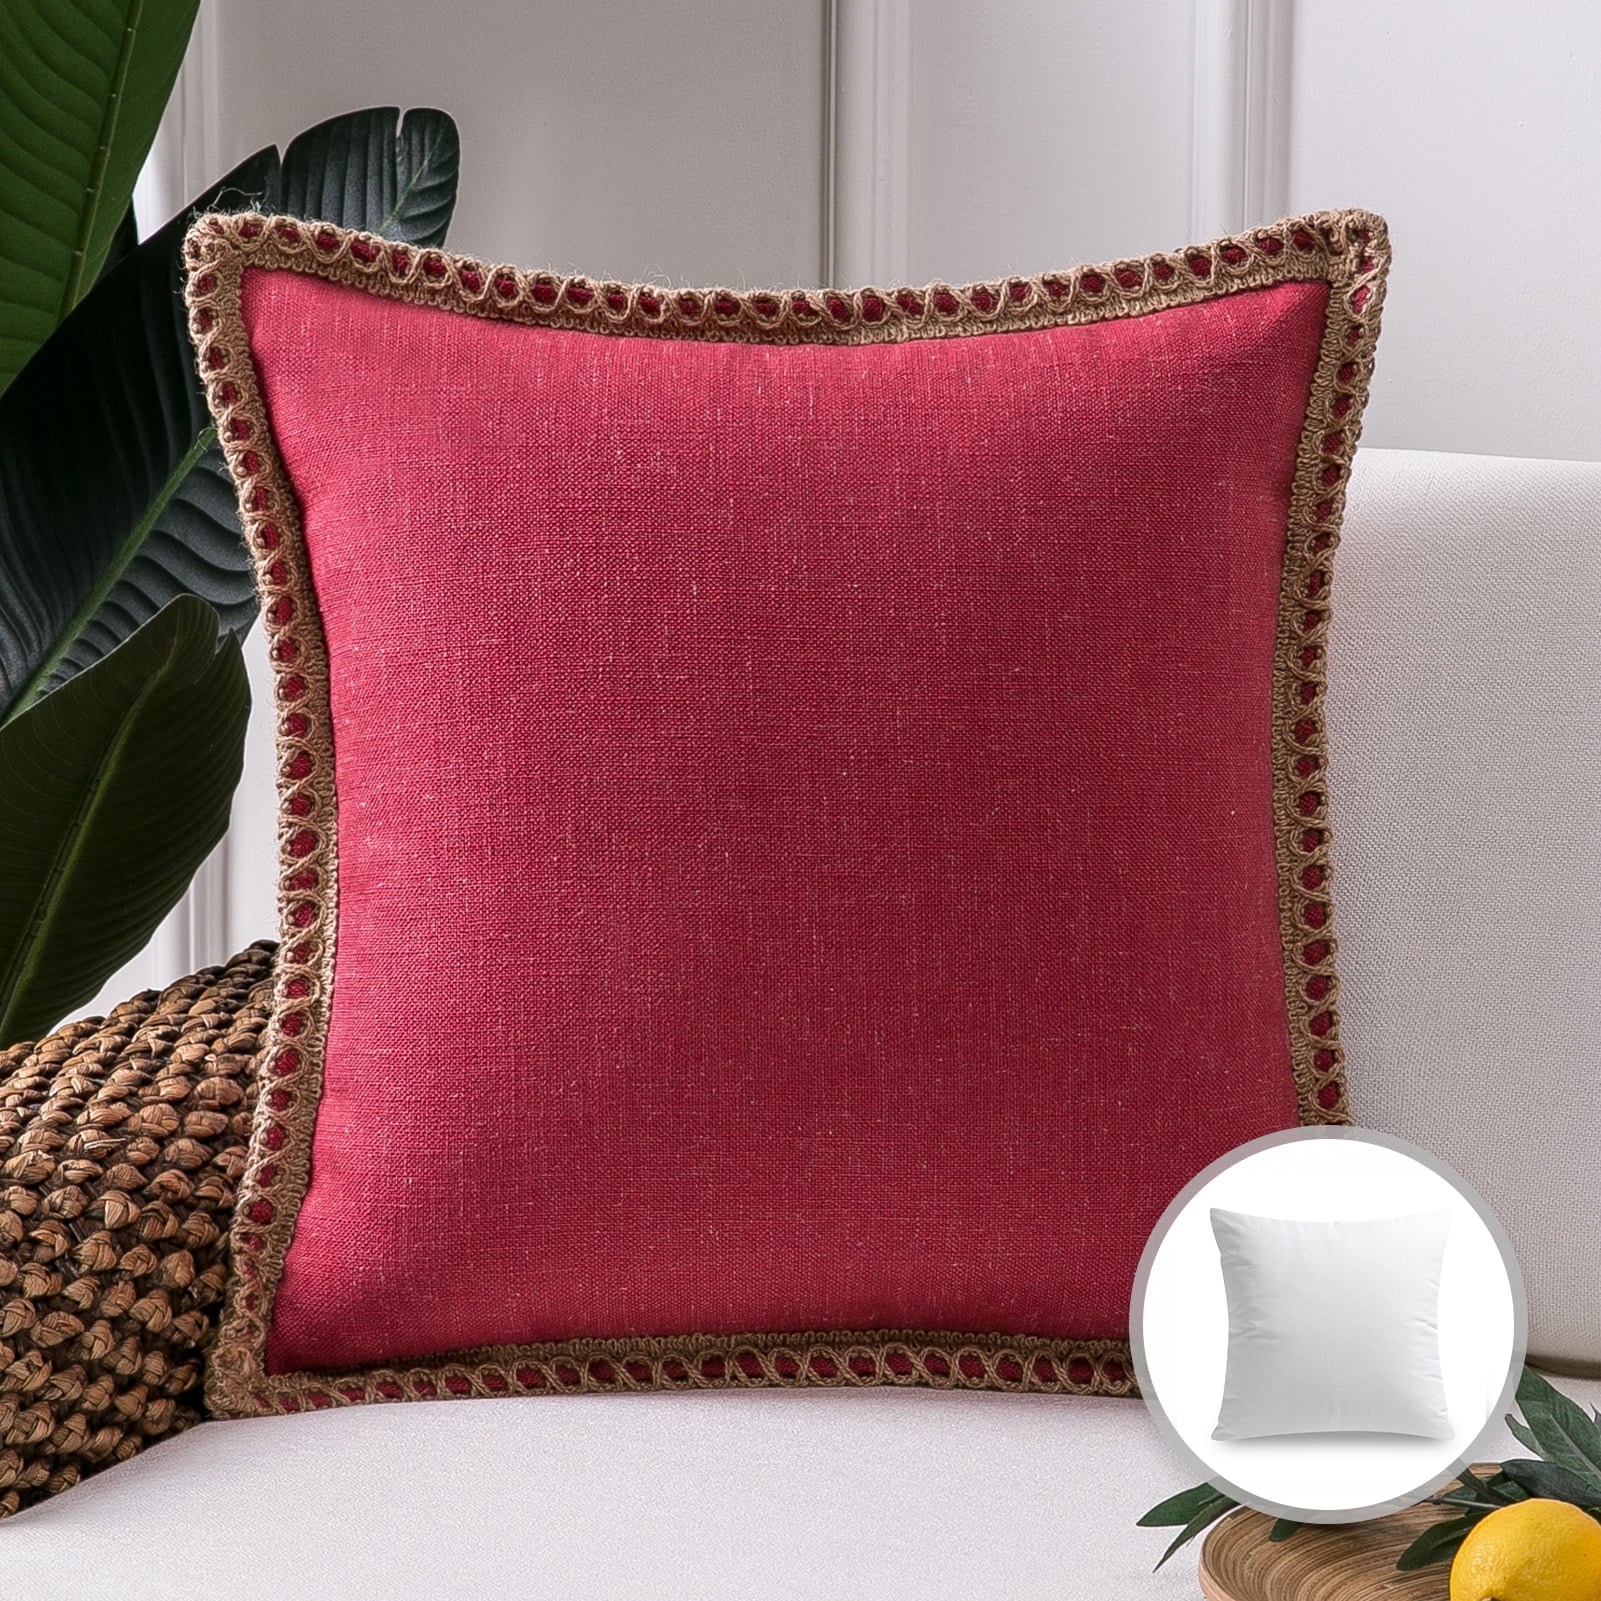 Red Throw Pillow Simple Design Polyester Linen Love Truck